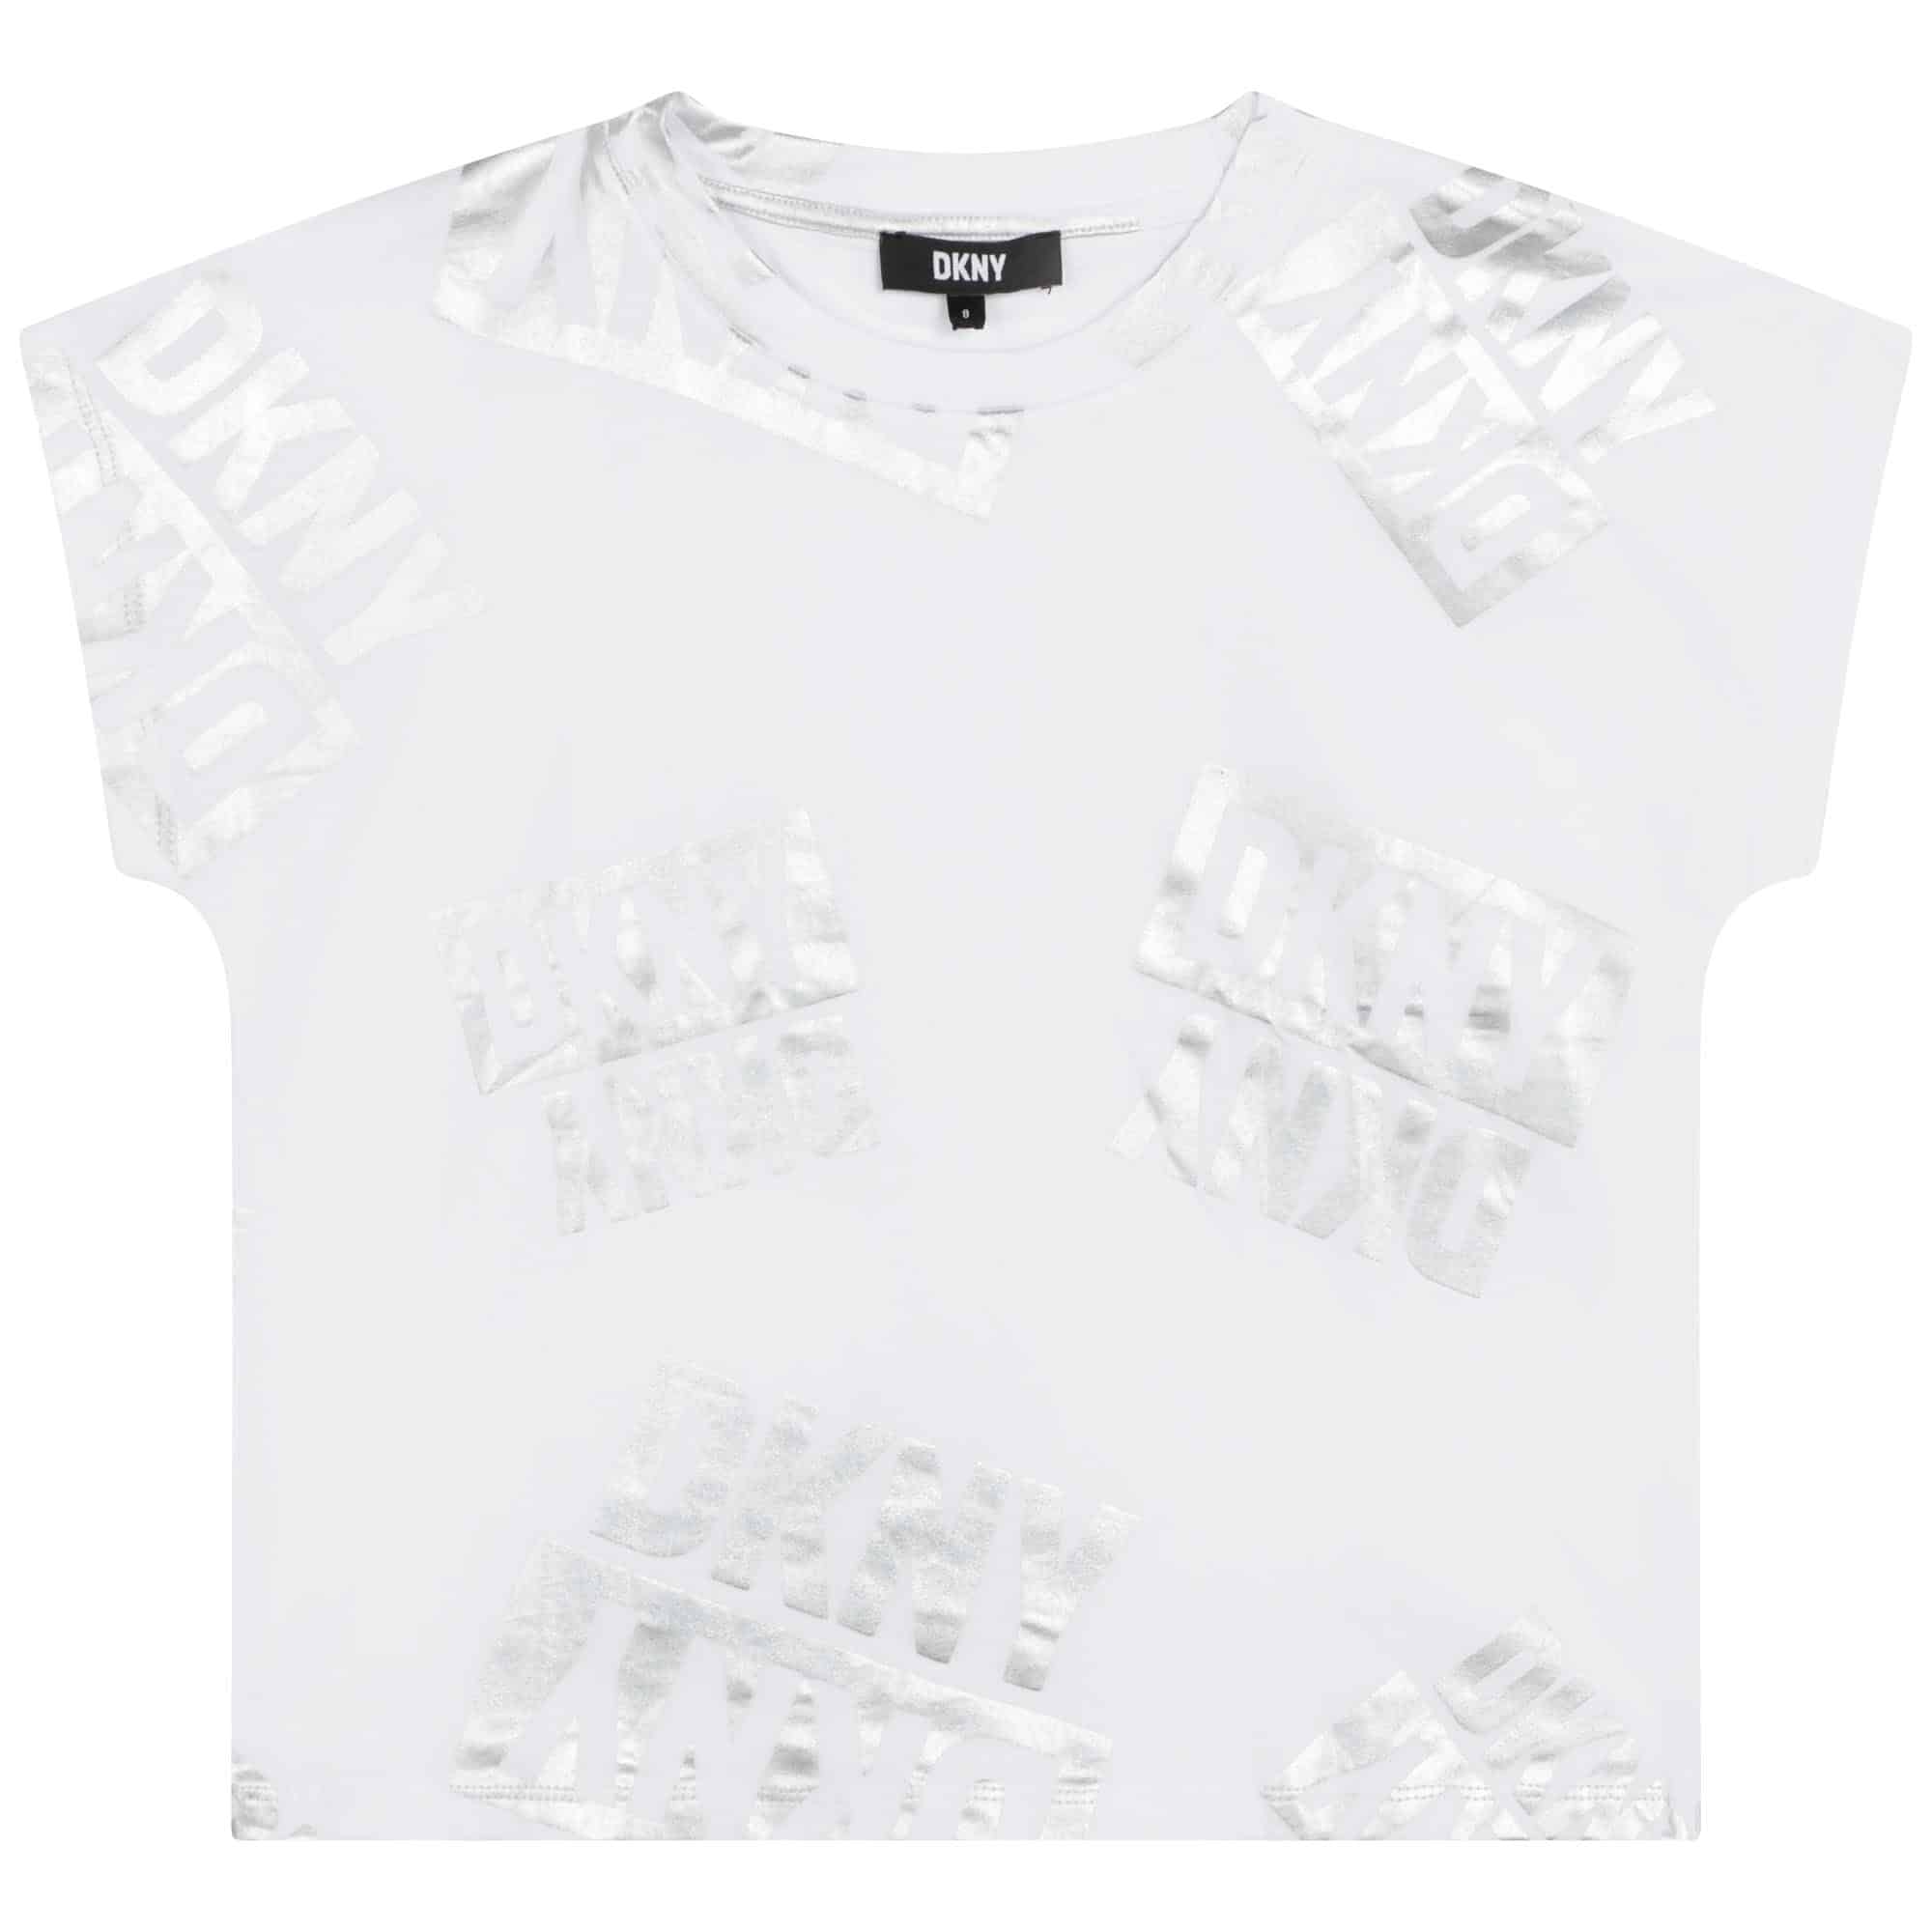 DKNY girls white tshirt with multiple silver logos